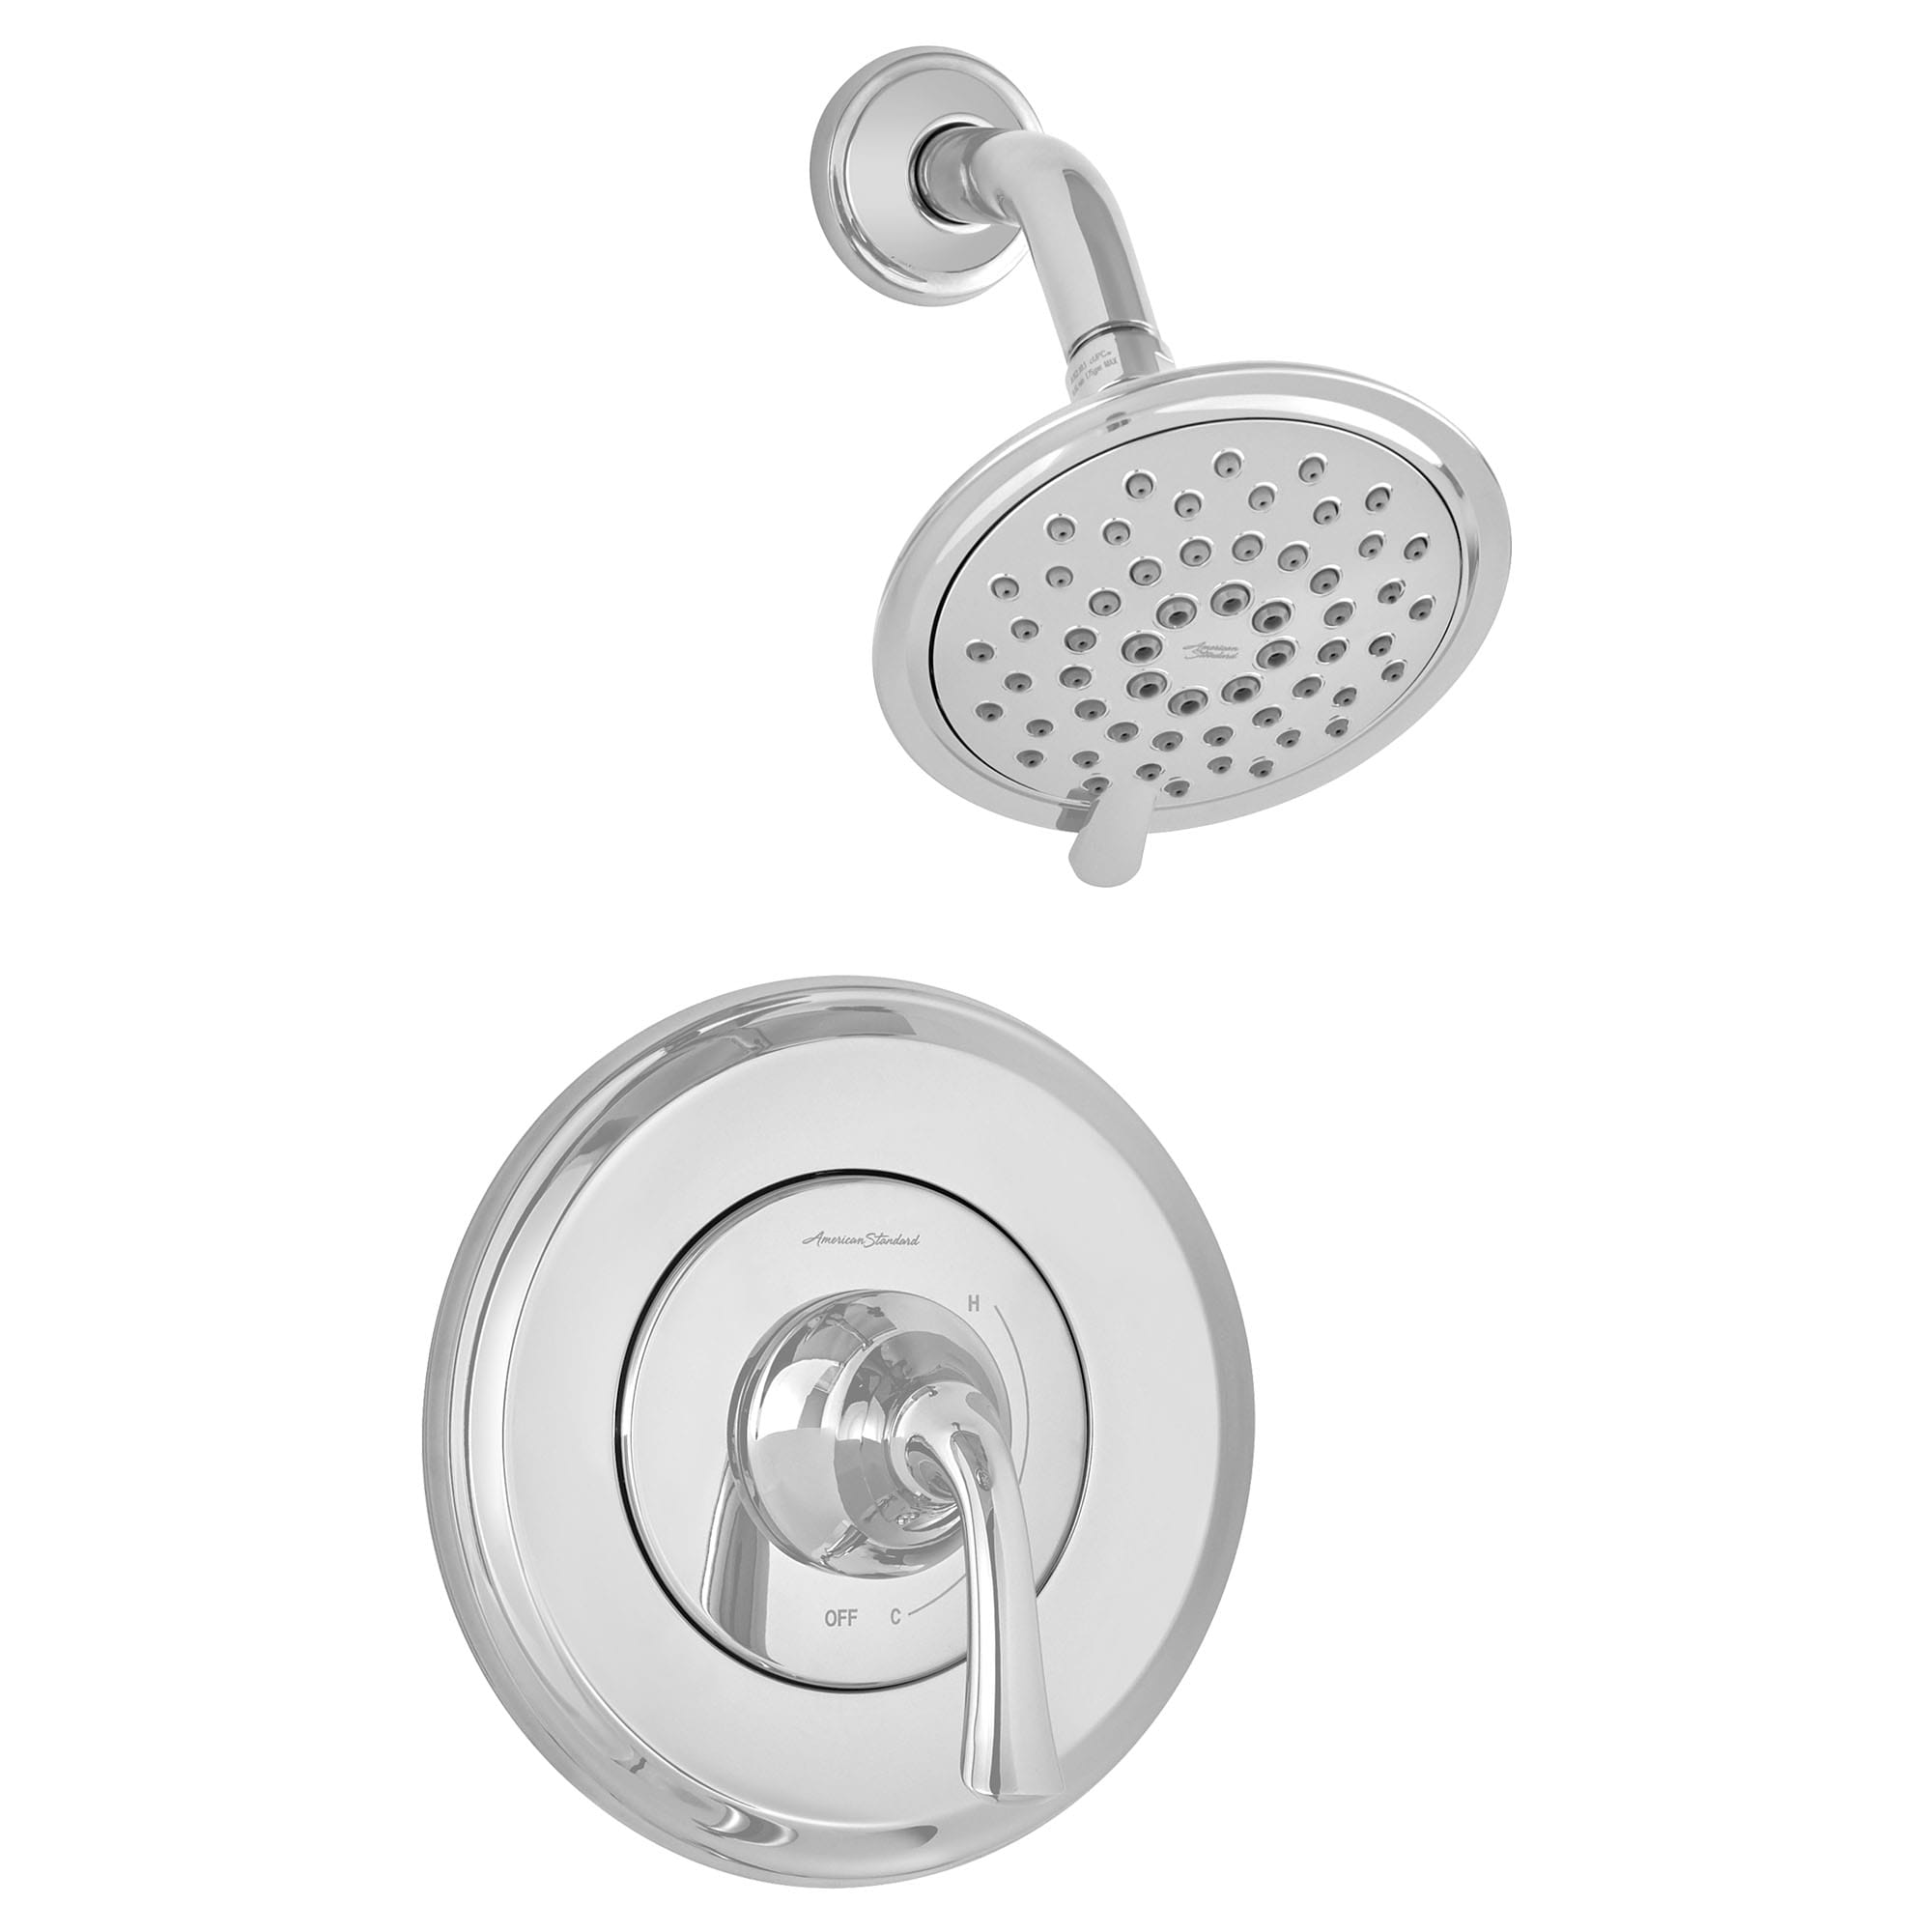 Patience 25 gpm 95 L min Shower Trim Kit With 3 Function Showerhead Double Ceramic Pressure Balance Cartridge With Lever Handle CHROME